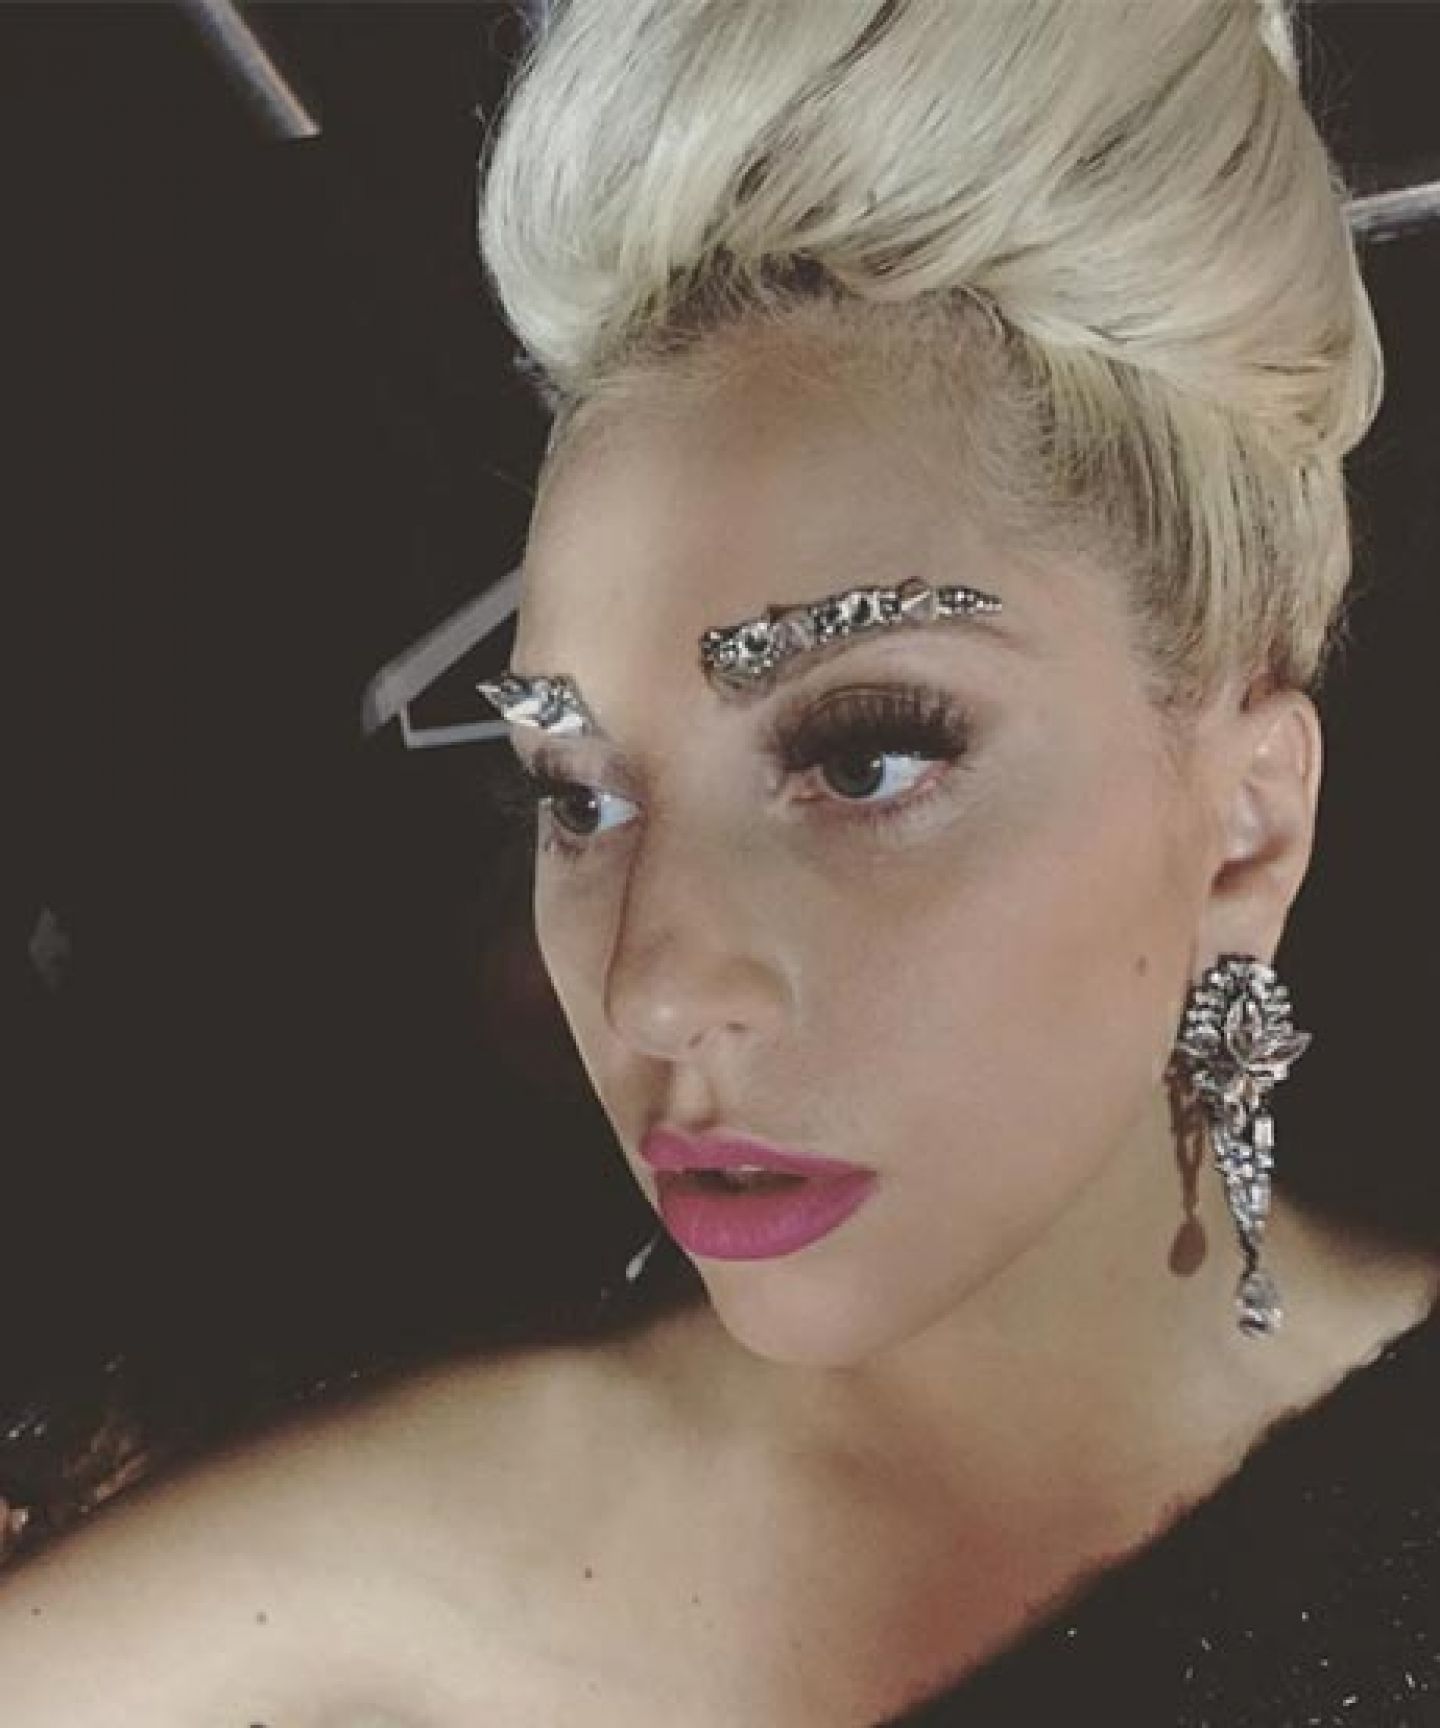 This Is What It Takes To Bedazzle Lady Gaga's Eyebrows